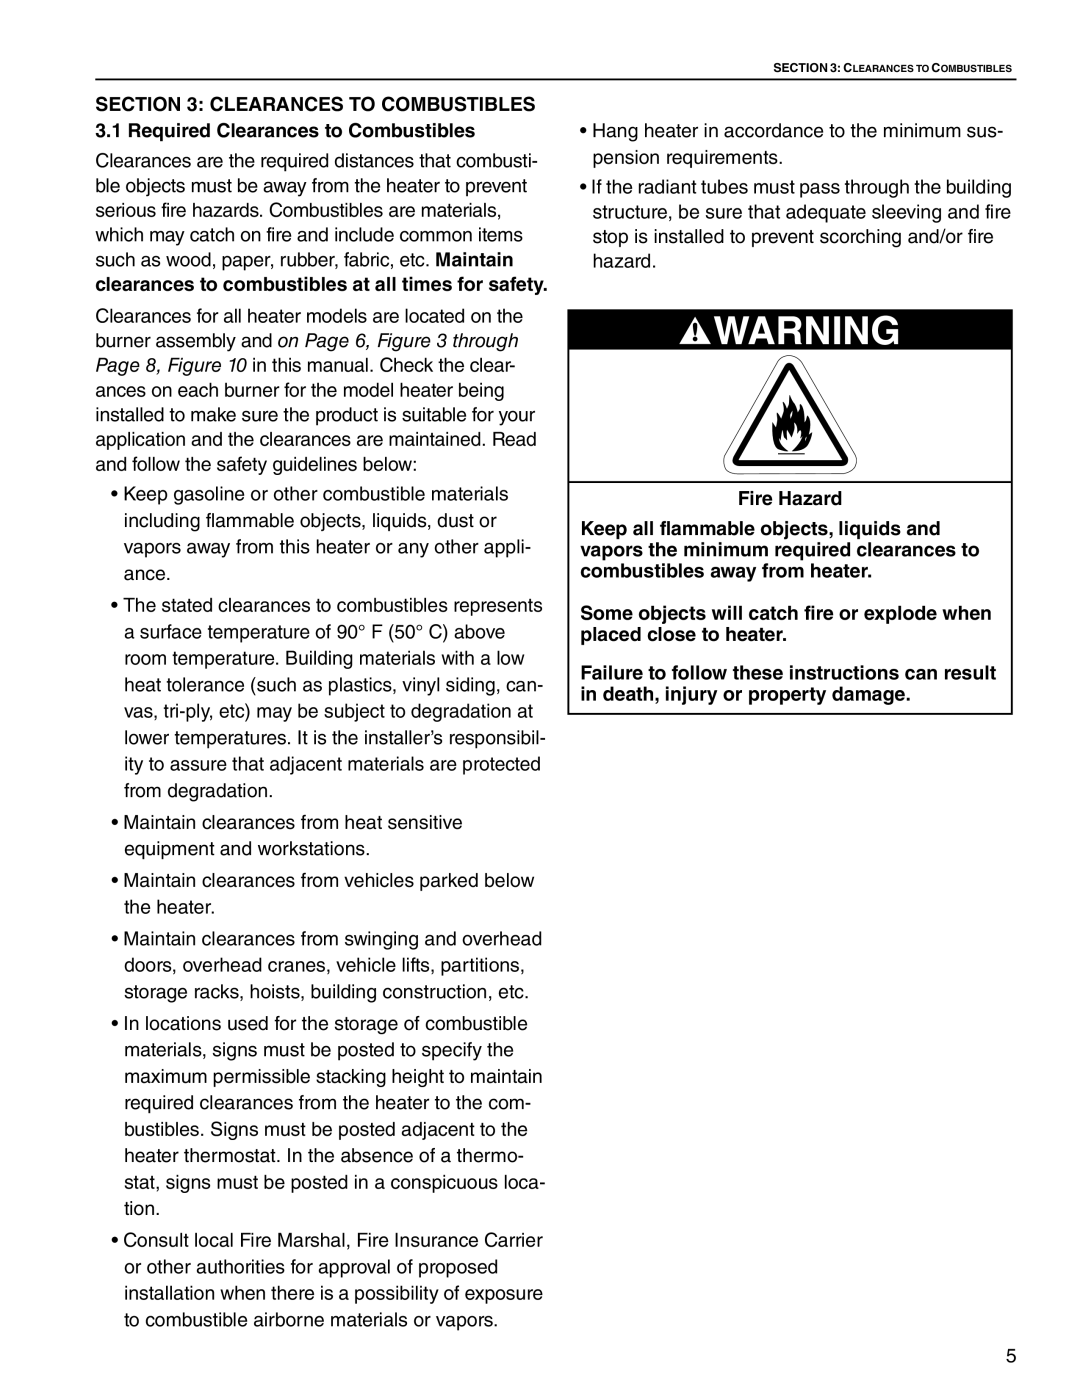 Roberts Gorden CRV-B-9 service manual Fire Hazard, clearances to combustibles at all times for safety 